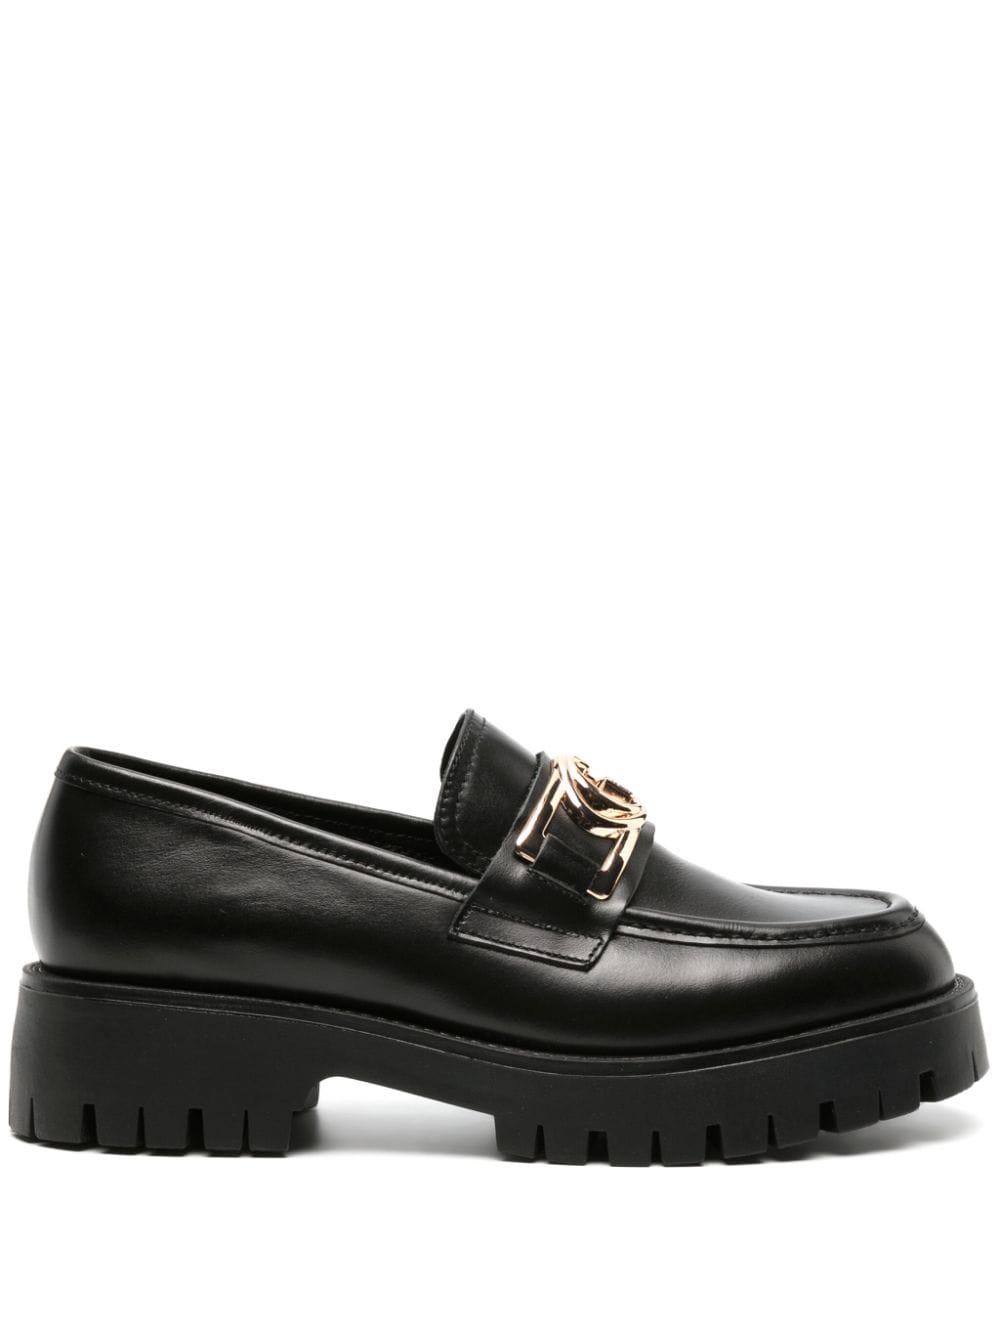 Guess Usa Ilary Logo-plaque Loafers In Black